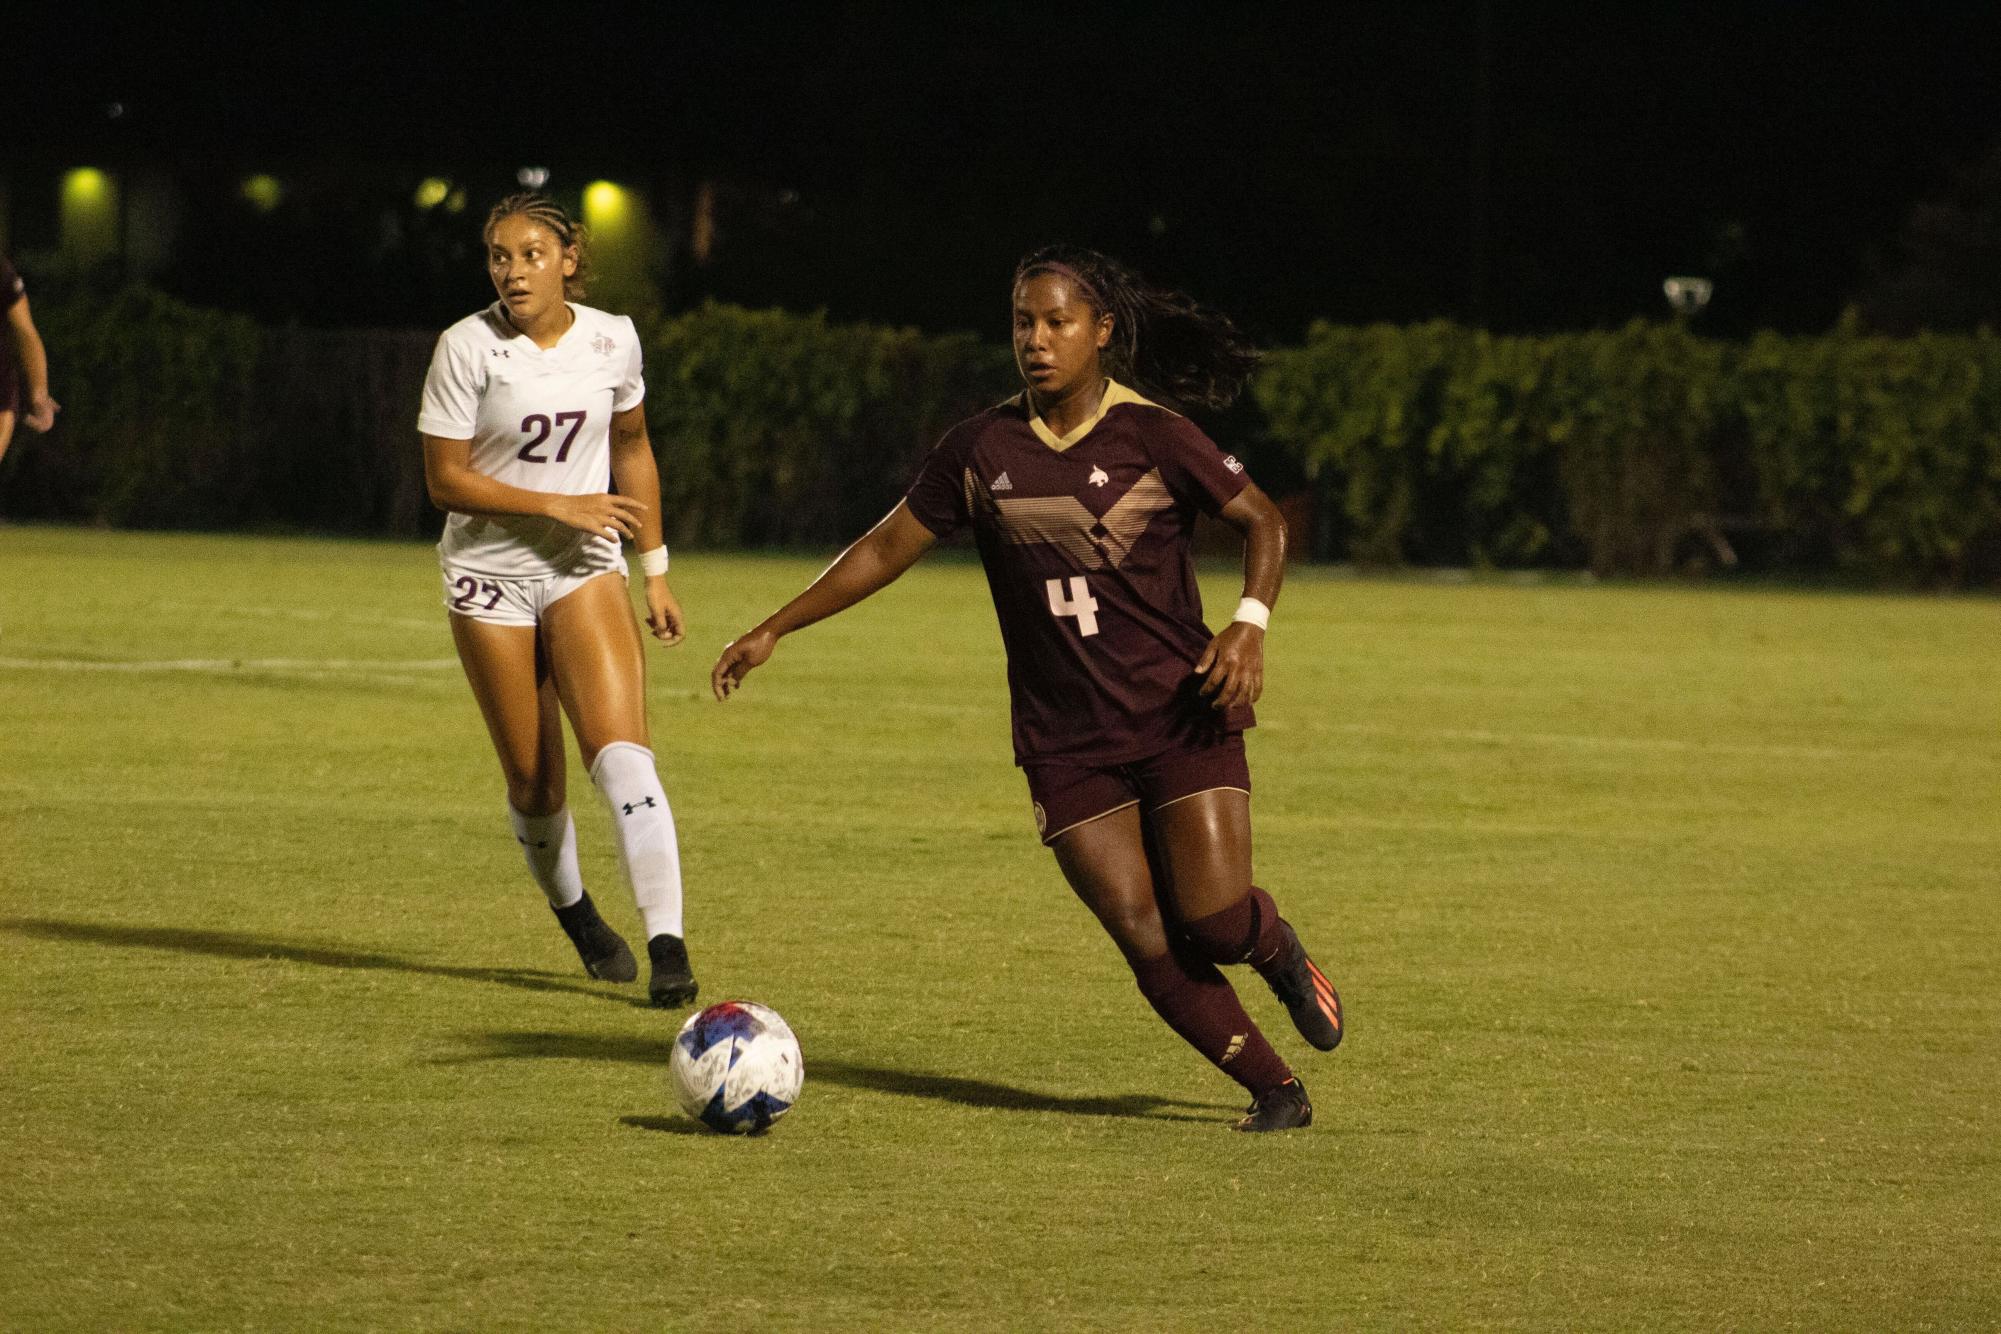 El Salvador midfielder Victoria Meza brings professional experience and skill to Texas State soccer team